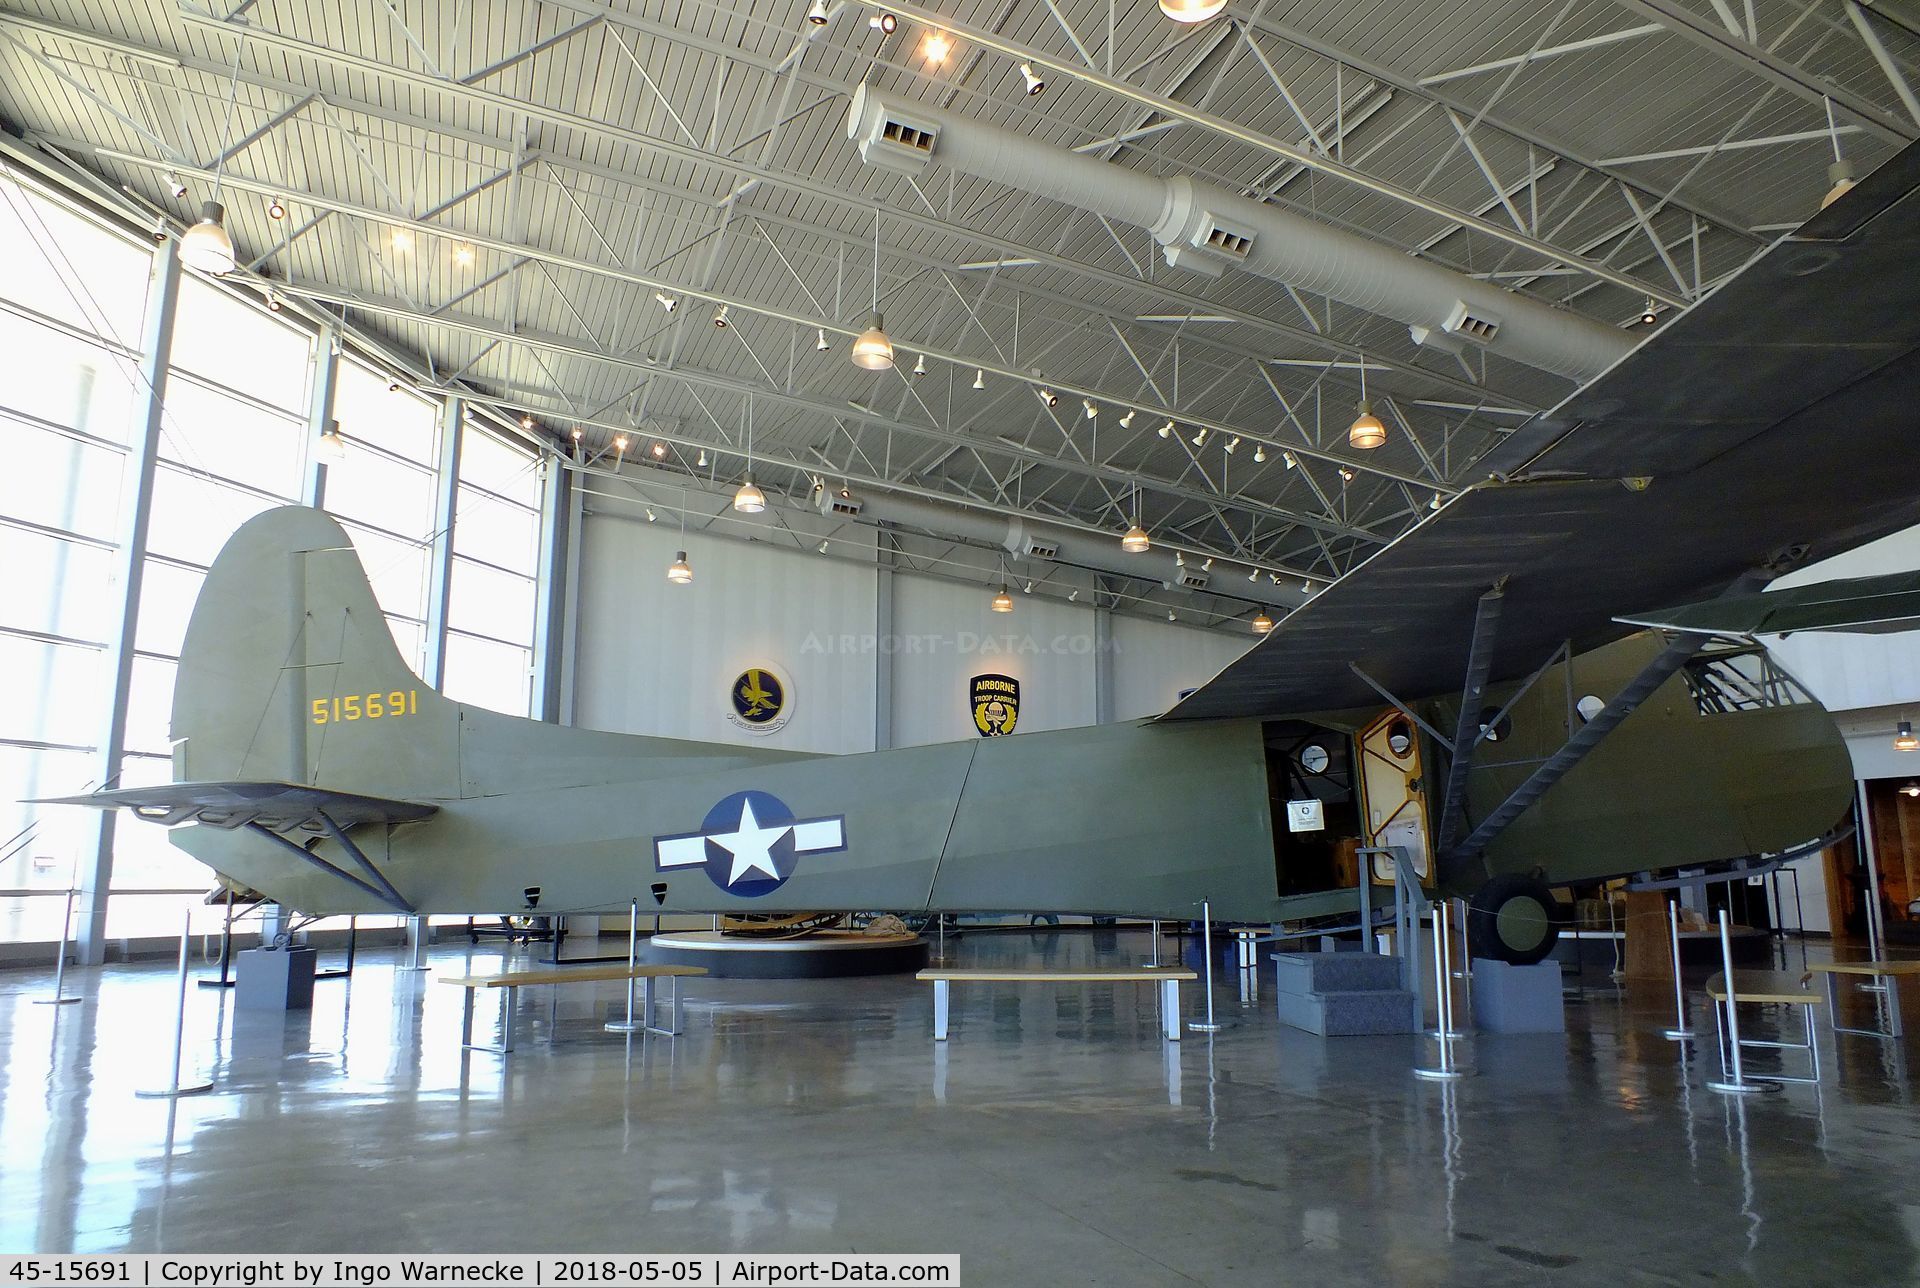 45-15691, 1945 Waco CG-4A C/N Not found, Waco CG-4A Hadrian at the Silent Wings Museum, Lubbock TX